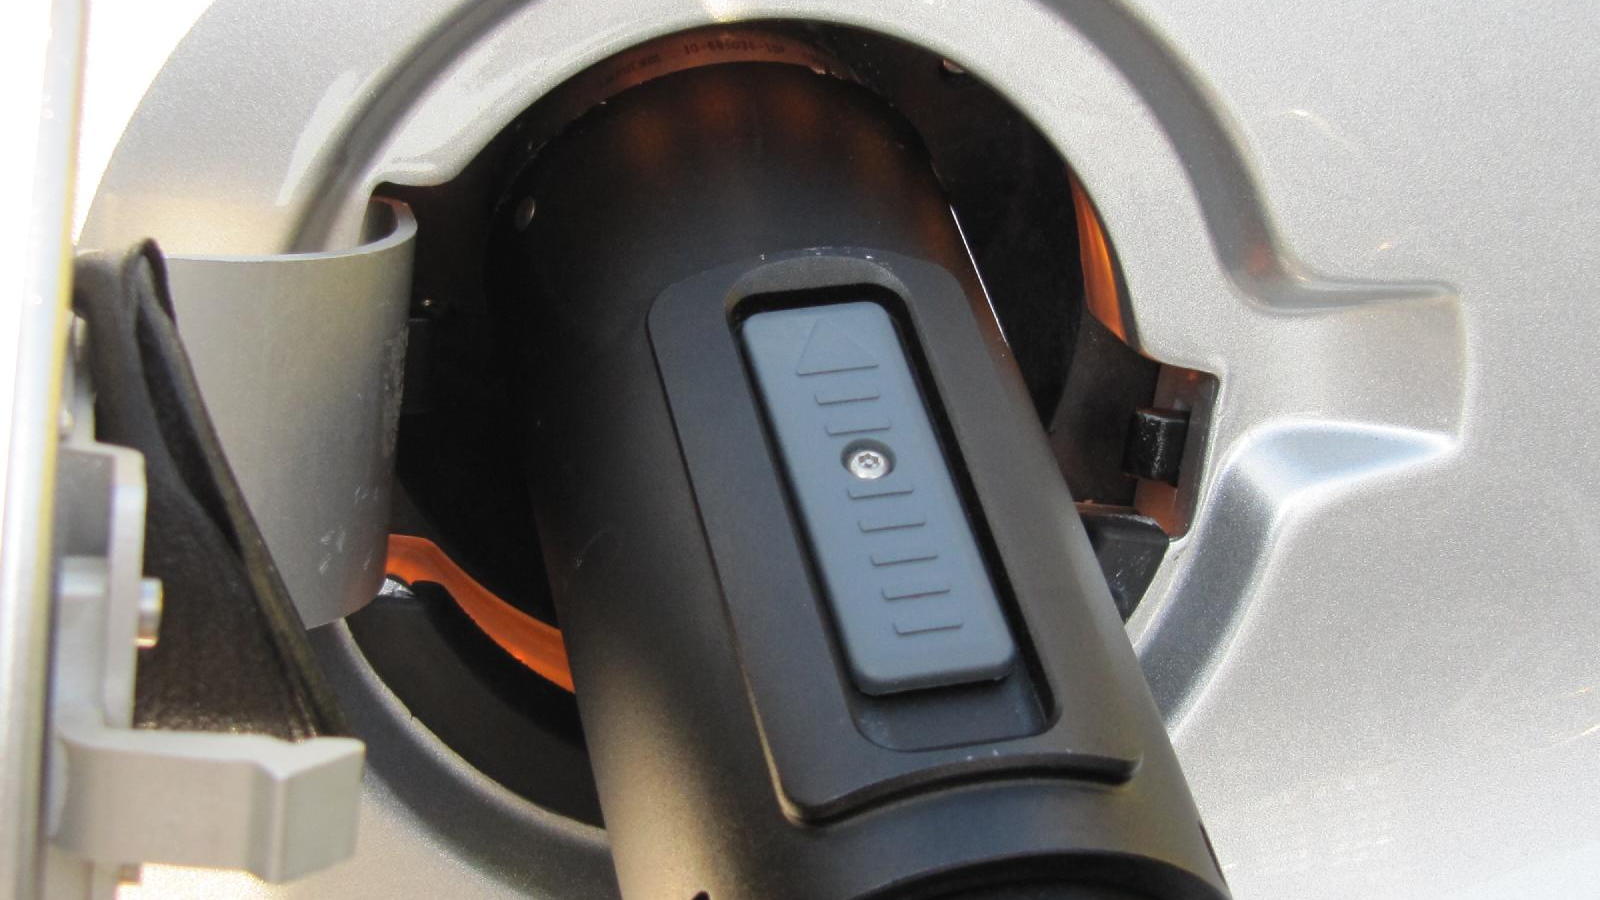 Home-made J-1772 adaptor for Tesla Roadster charging cord, built and used by Michael Thwaite